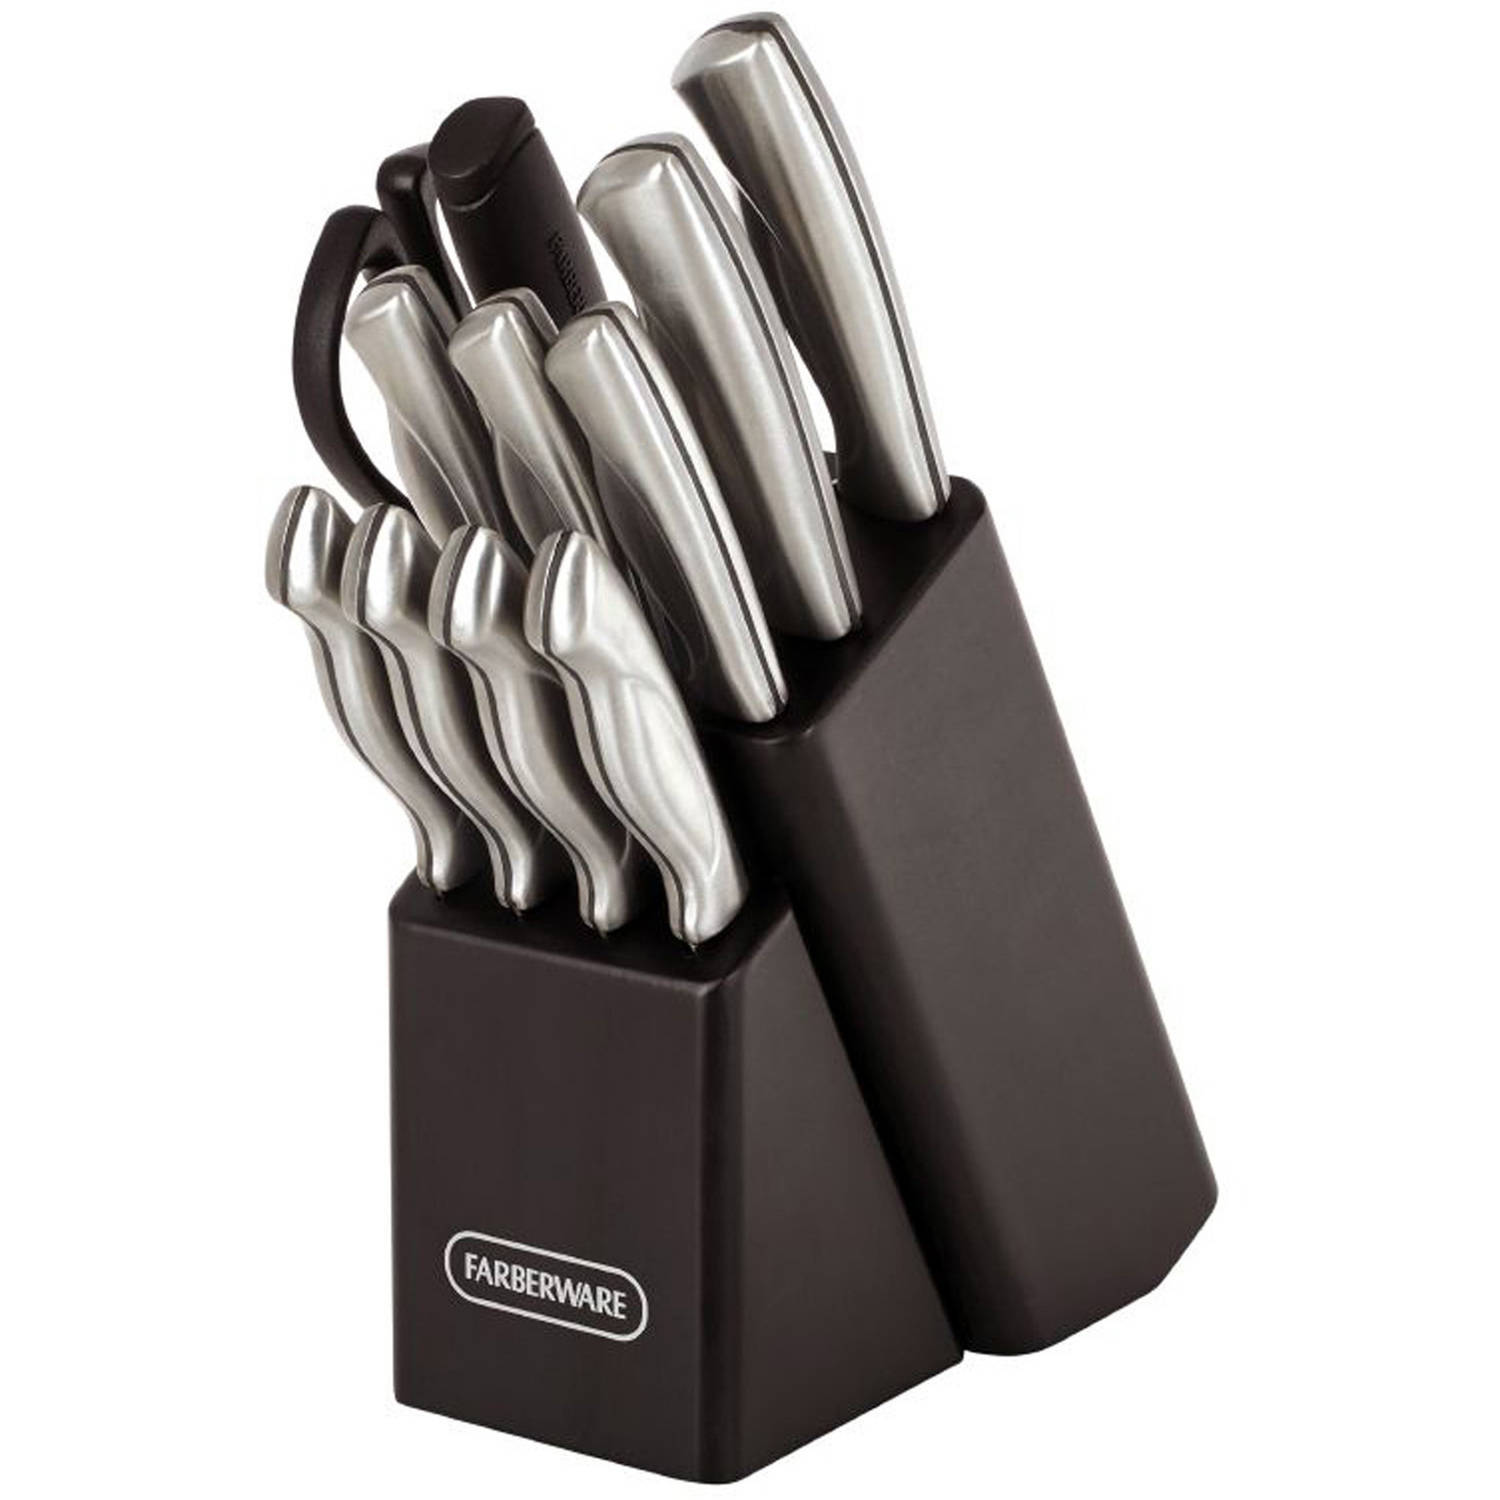 Farberware Classic 22 Piece Stamped Stainless Steel Knife Set and Utensil Set - image 4 of 27